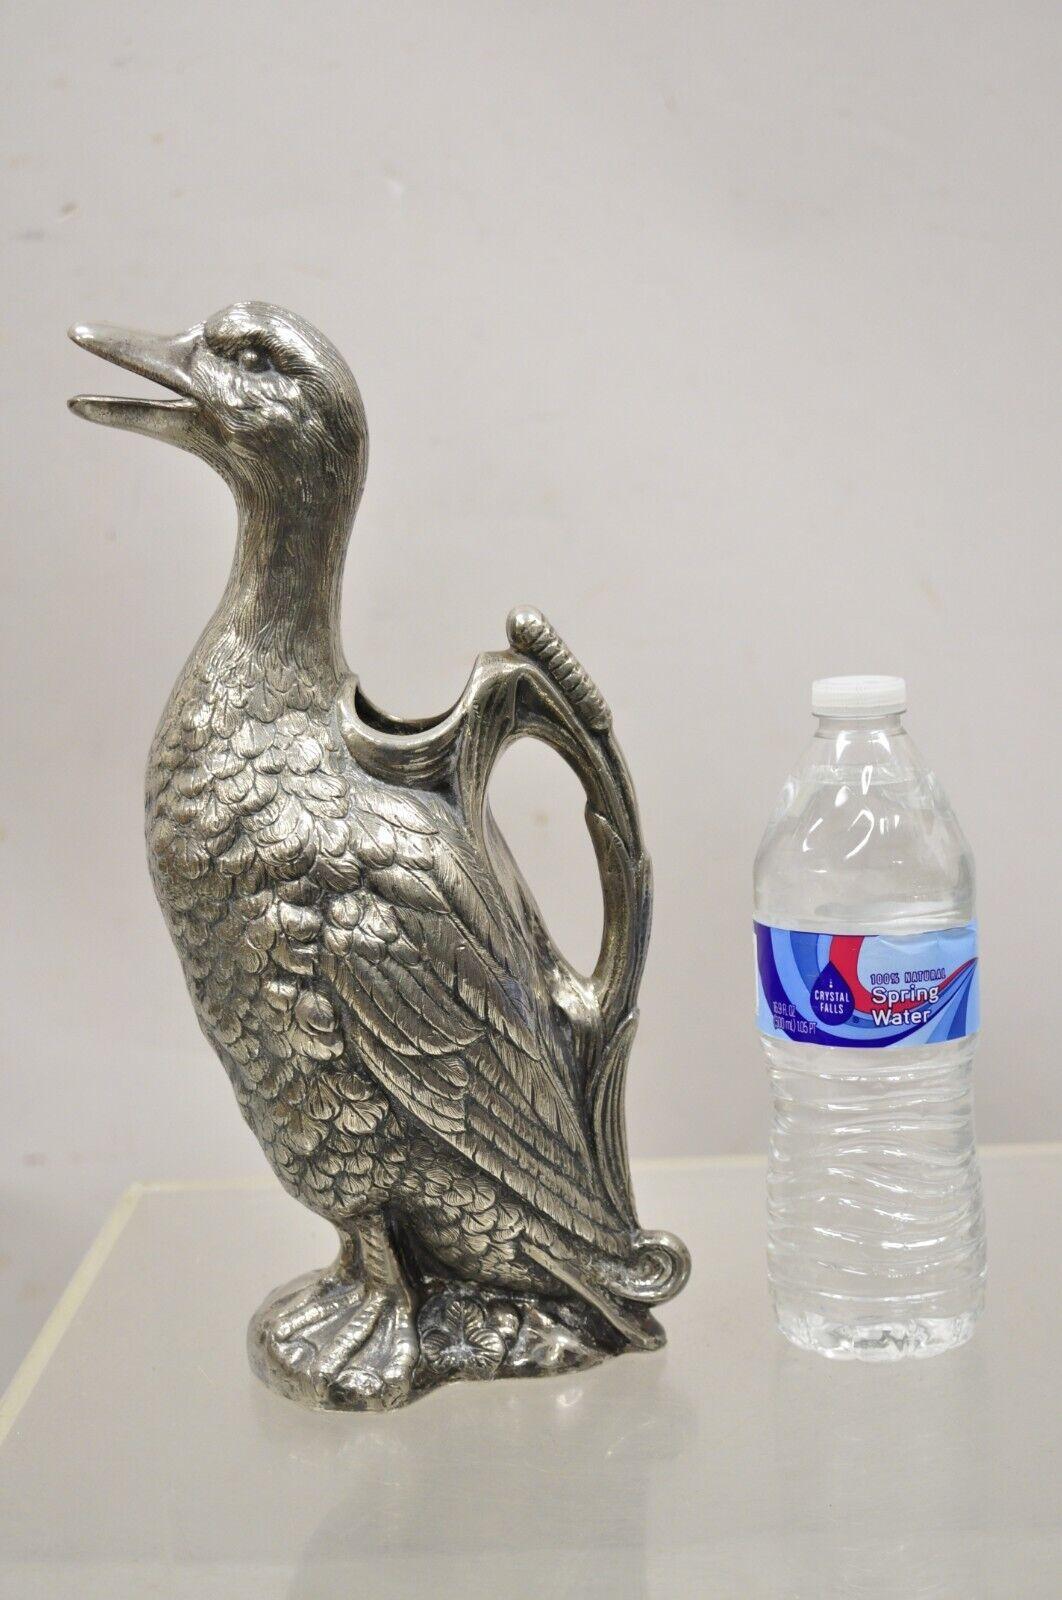 Vintage Alpaca Duck Mallard Figural Silver Plated Water Pitcher Decanter. Item features a nice heavy weight, remarkably detailed, original stamp, very nice vintage item, quality craftsmanship, great style and form. Circa Mid 20th Century.